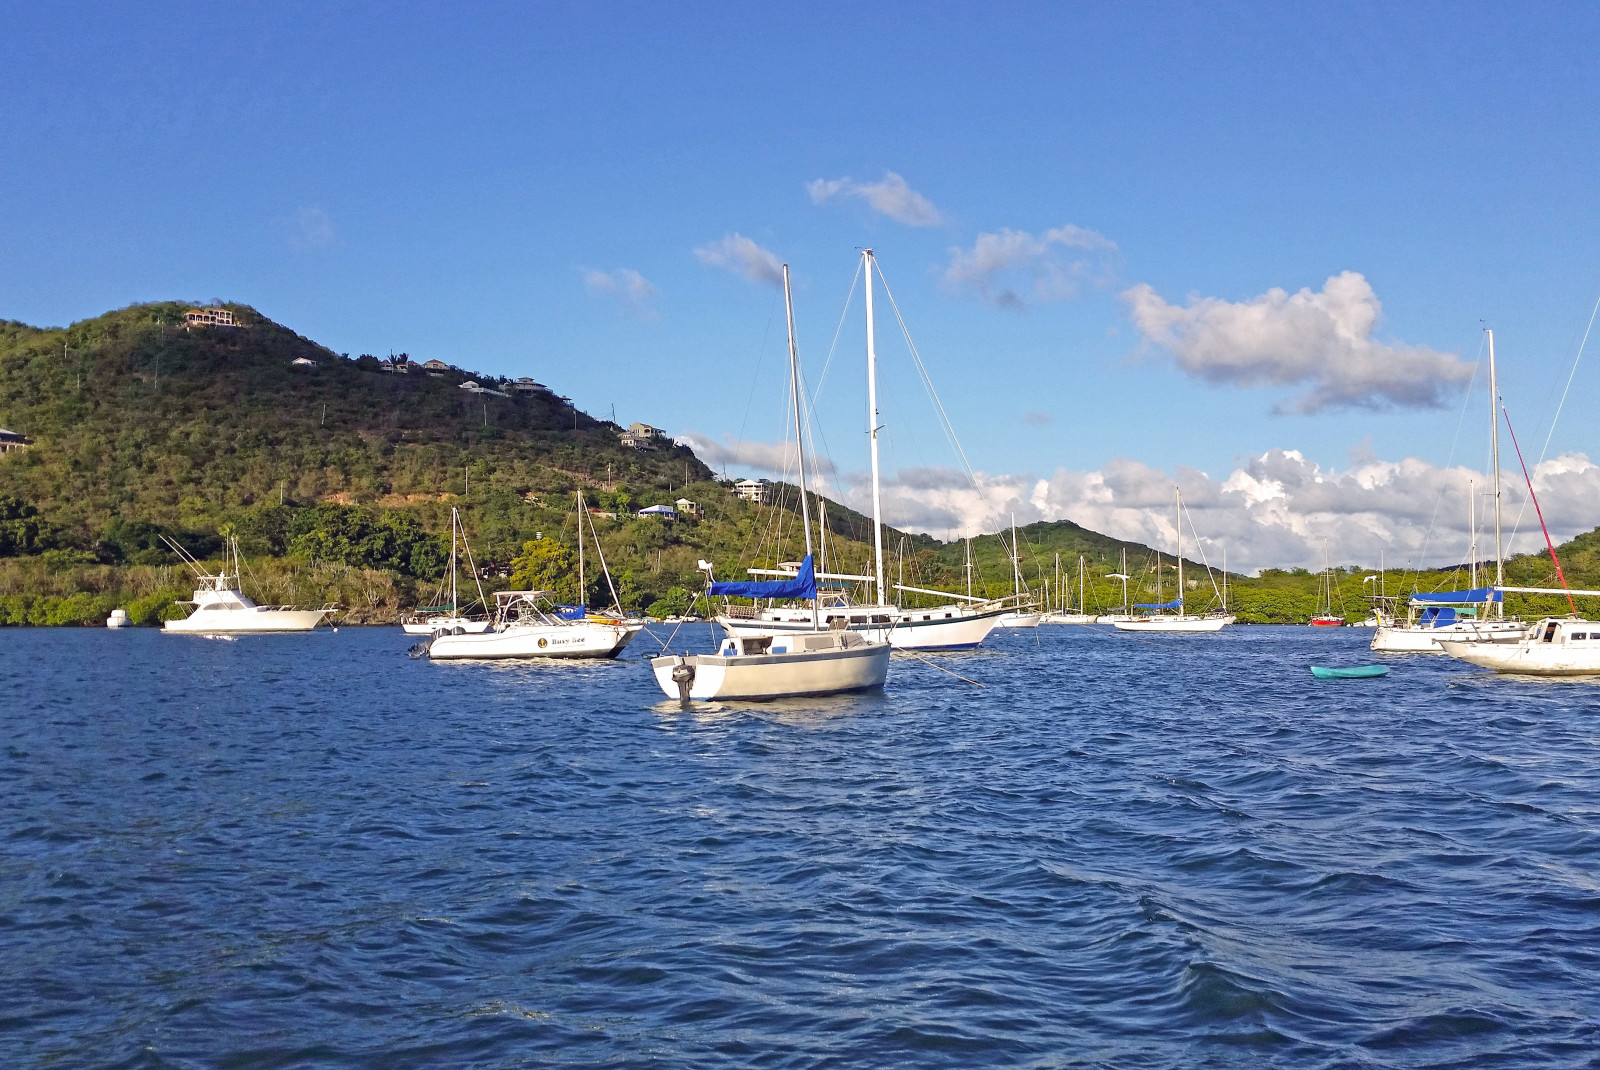 Sail boats on Coral Bay in St. John with a blue sky